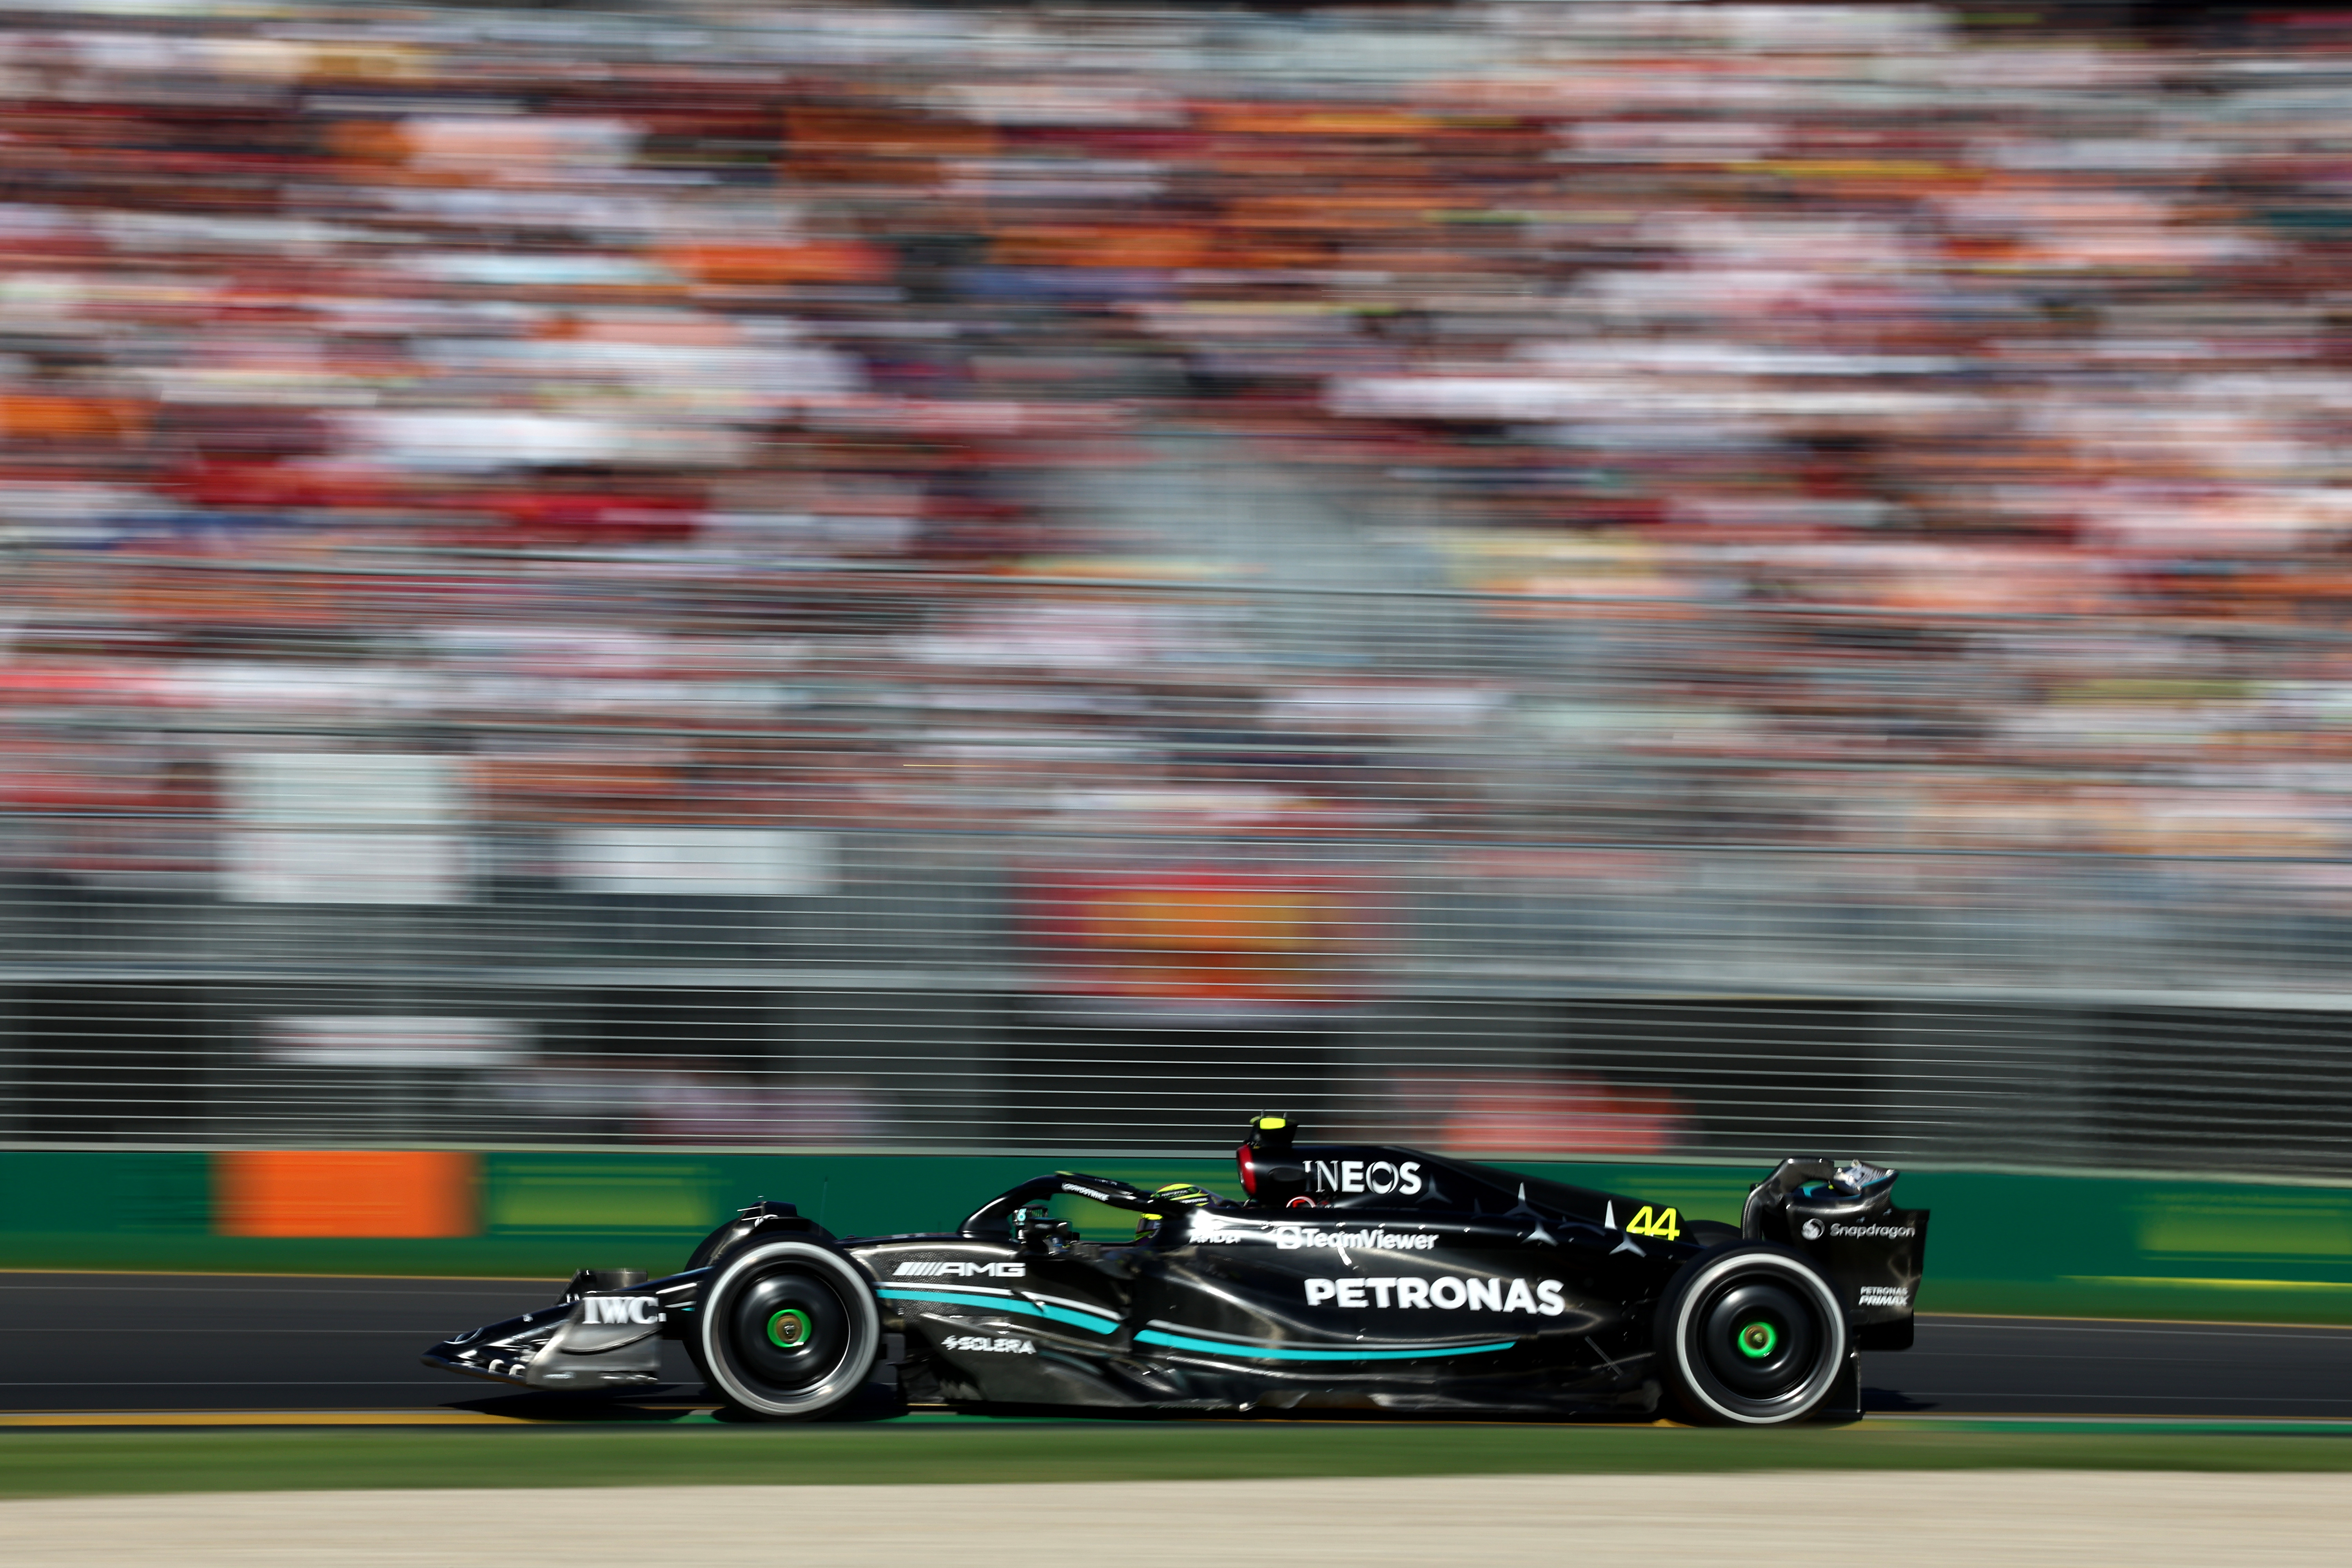 This is how the F1 World Championship is going: The fastest car isn't  dominating